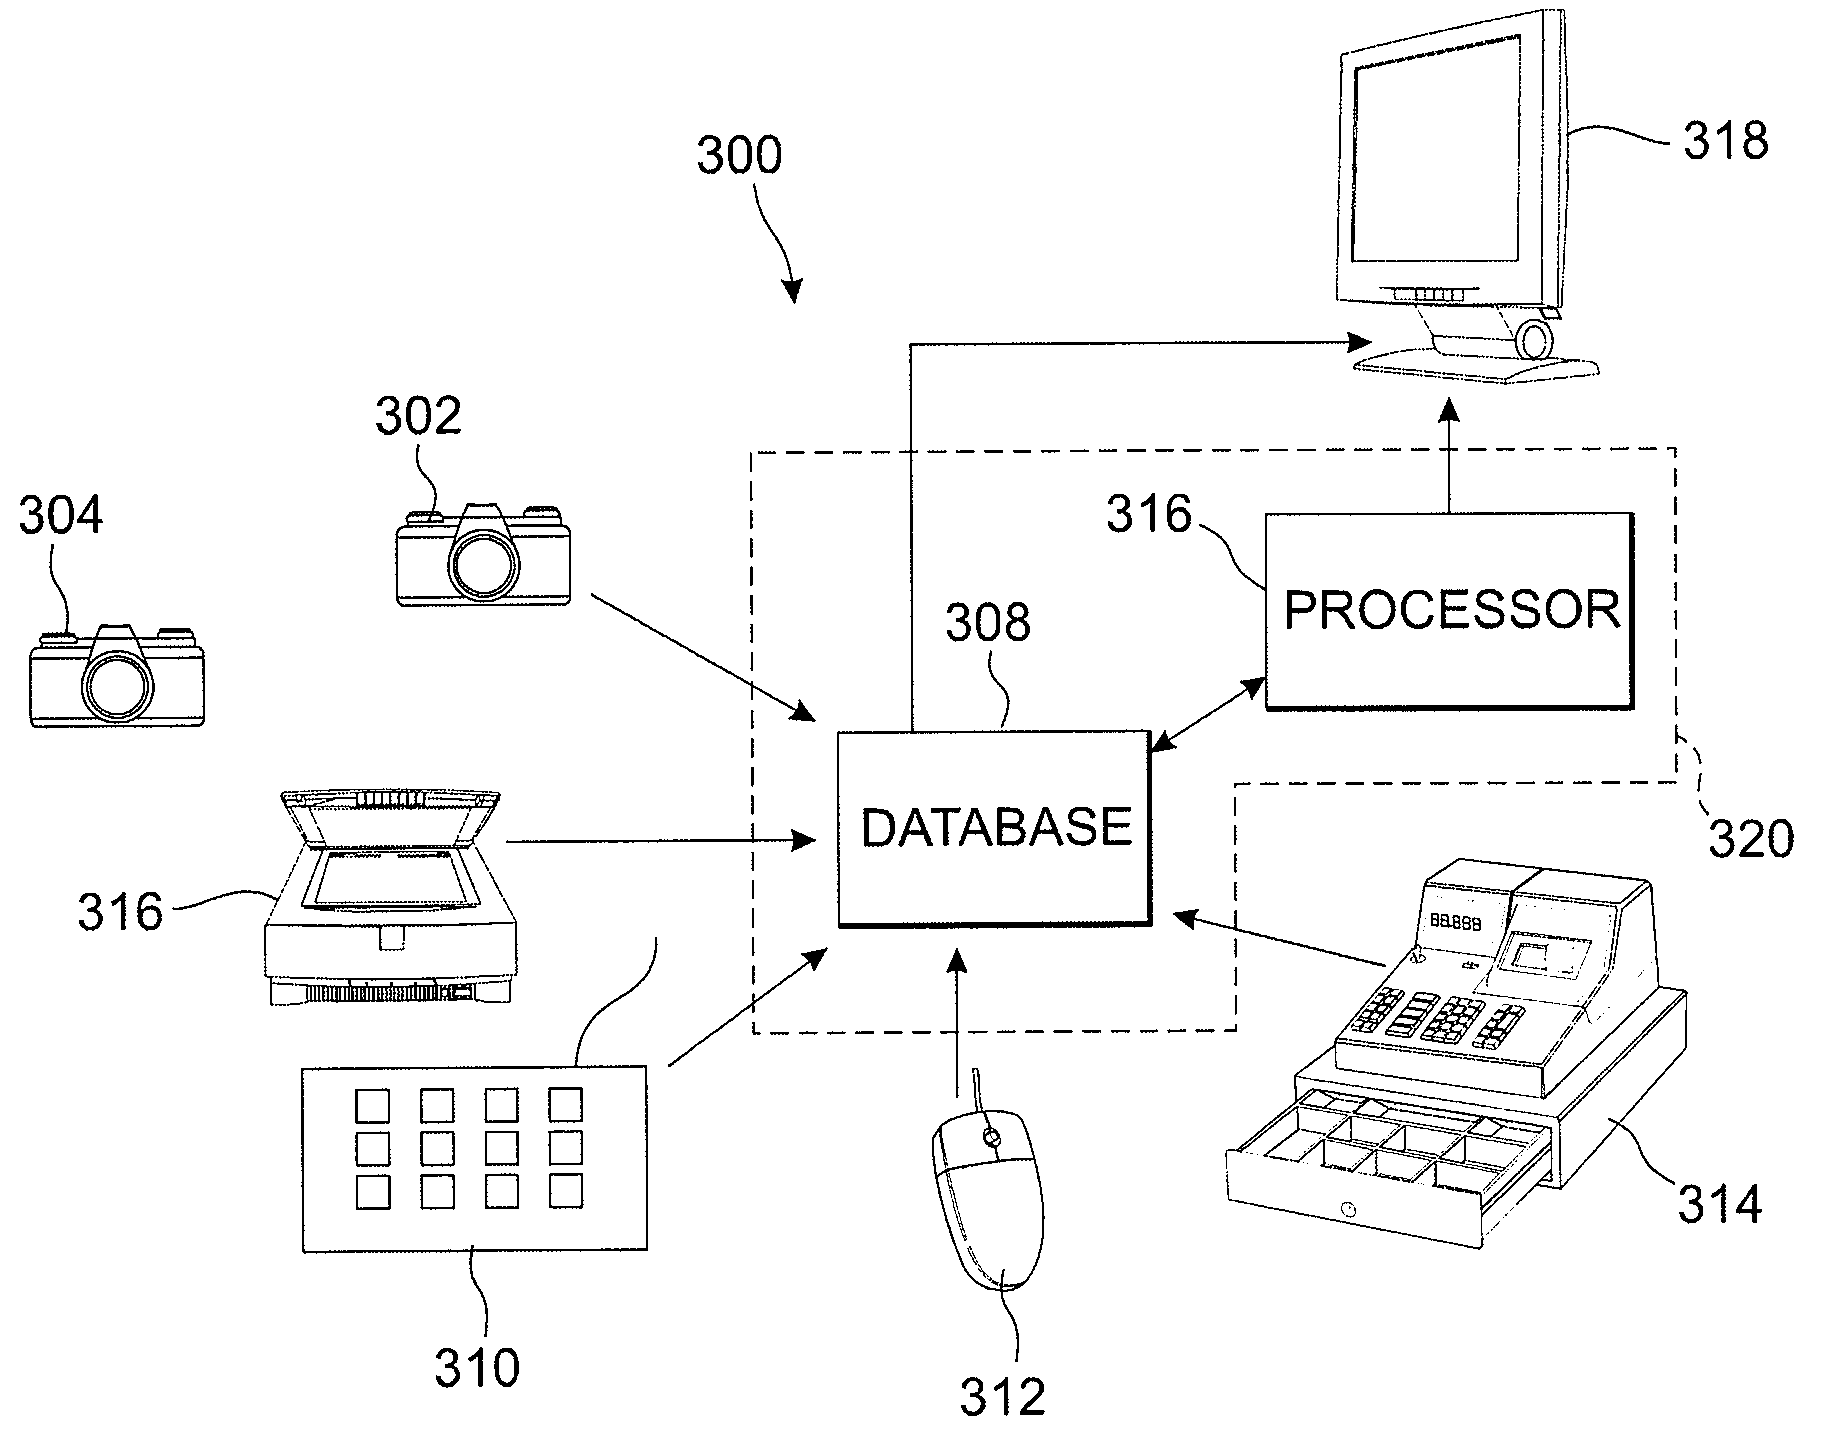 System, Method, And Computer Program Product For Evaluating Photographic Performance